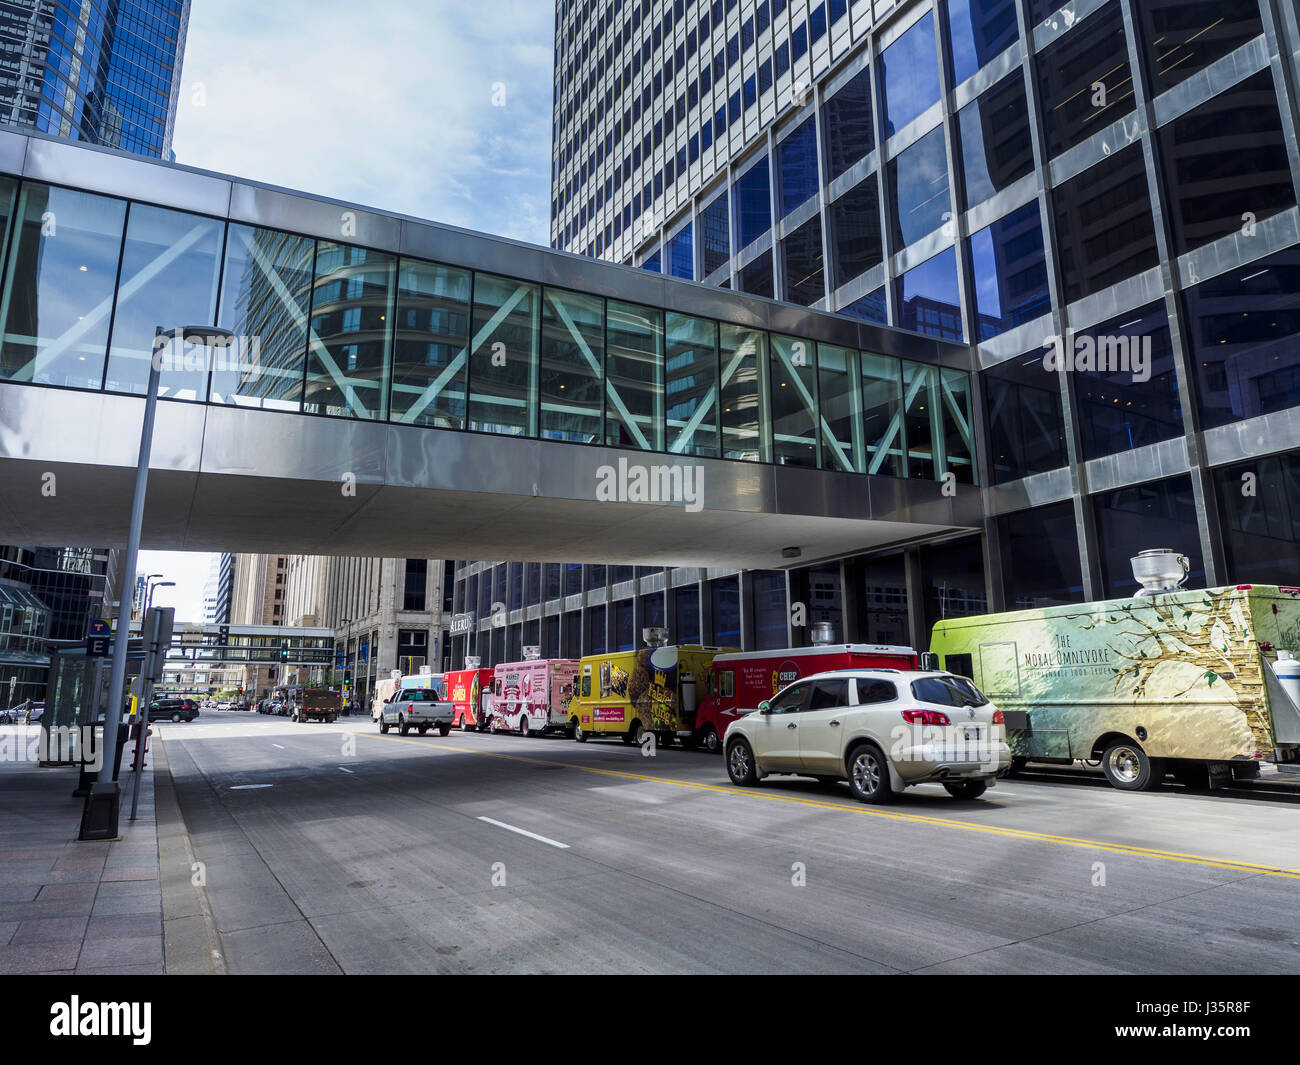 Minneapolis, Minnesota, USA. 3rd May, 2017. Skyways in downtown Minneapolis. The skyways are enclosed pedestrian overpasses that connect downtown buildings. The Minneapolis Skyway was started in the early 1960s as a response to covered shopping malls in the suburbs that were drawing shoppers out of the downtown area. The system grew sporadically until 1974, when the construction of the IDS Center and its center atrium, called the Crystal Court, served as a hub for the downtown skyway system. There are 8 miles of skyways, connecting most of the downtown buildings from Target Field (home of the Stock Photo